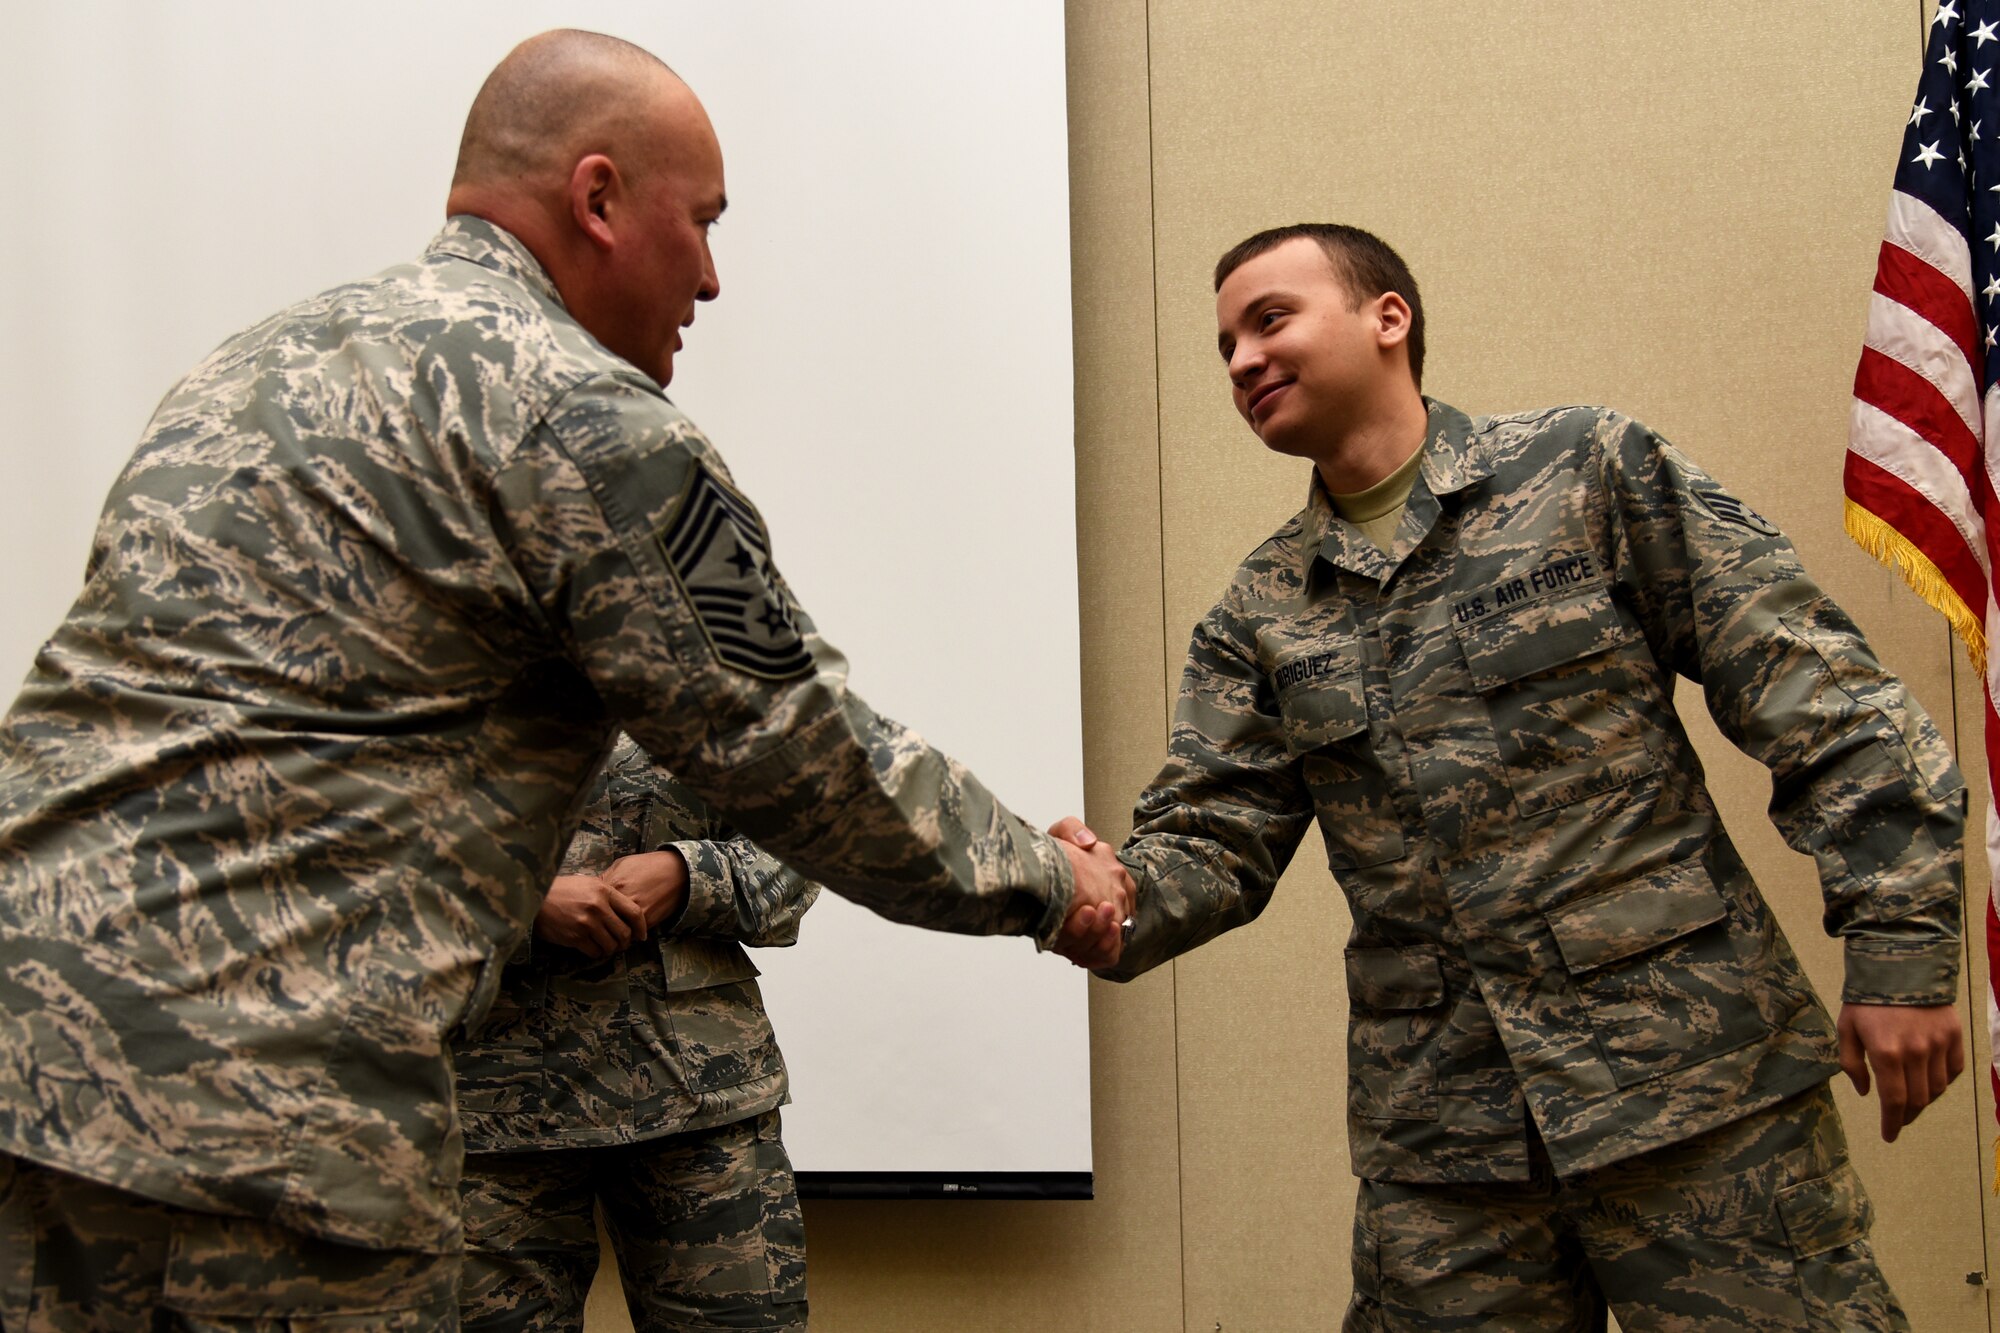 Chief Master Sgt. Mitchell O. Brush, the Senior Enlisted Advisor of the National Guard Bureau, coined Senior Airman Edwin Rodriguez, Jr., 108th Logistic Readiness Squadron, for his outstanding military service to the 108th Wing at the Joint Training and Training Development Center in Joint Base McGuire-Dix-Lakehurst, New Jersey, March 20, 2016. As the top noncommissioned officer of NGB, Brush advises the Chief, National Guard Bureau on all enlisted matters affecting training, effective utilization, the health of the force, and professional development for the National Guard. (U.S. Air National Guard photo by Tech. Sgt. Armando Vasquez/Released)